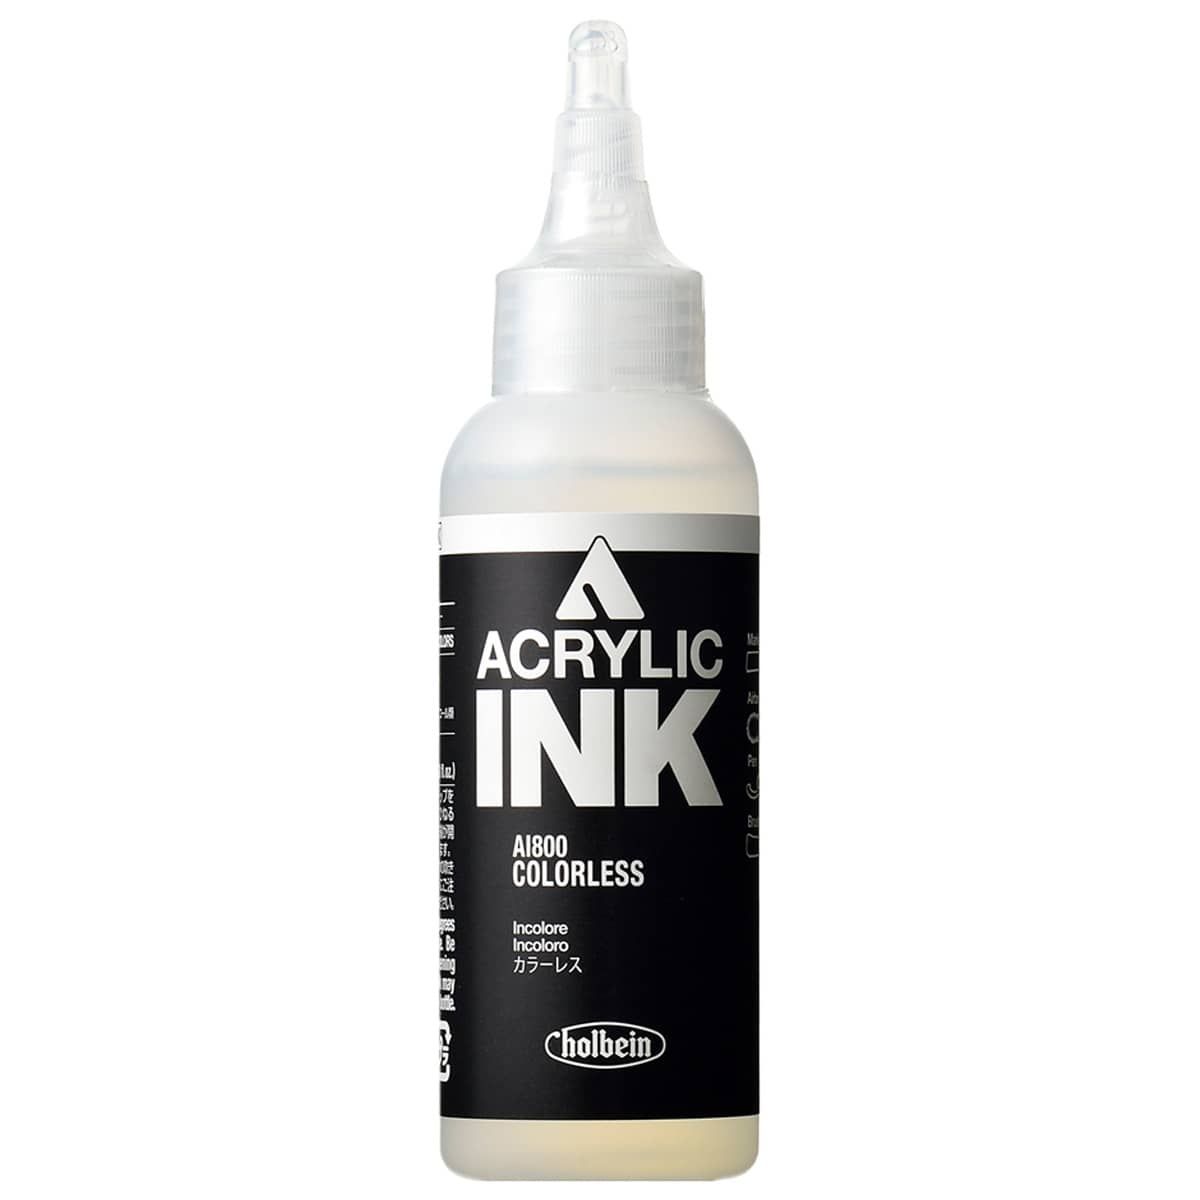 Holbein Acrylic Ink - Colorless, 100ml